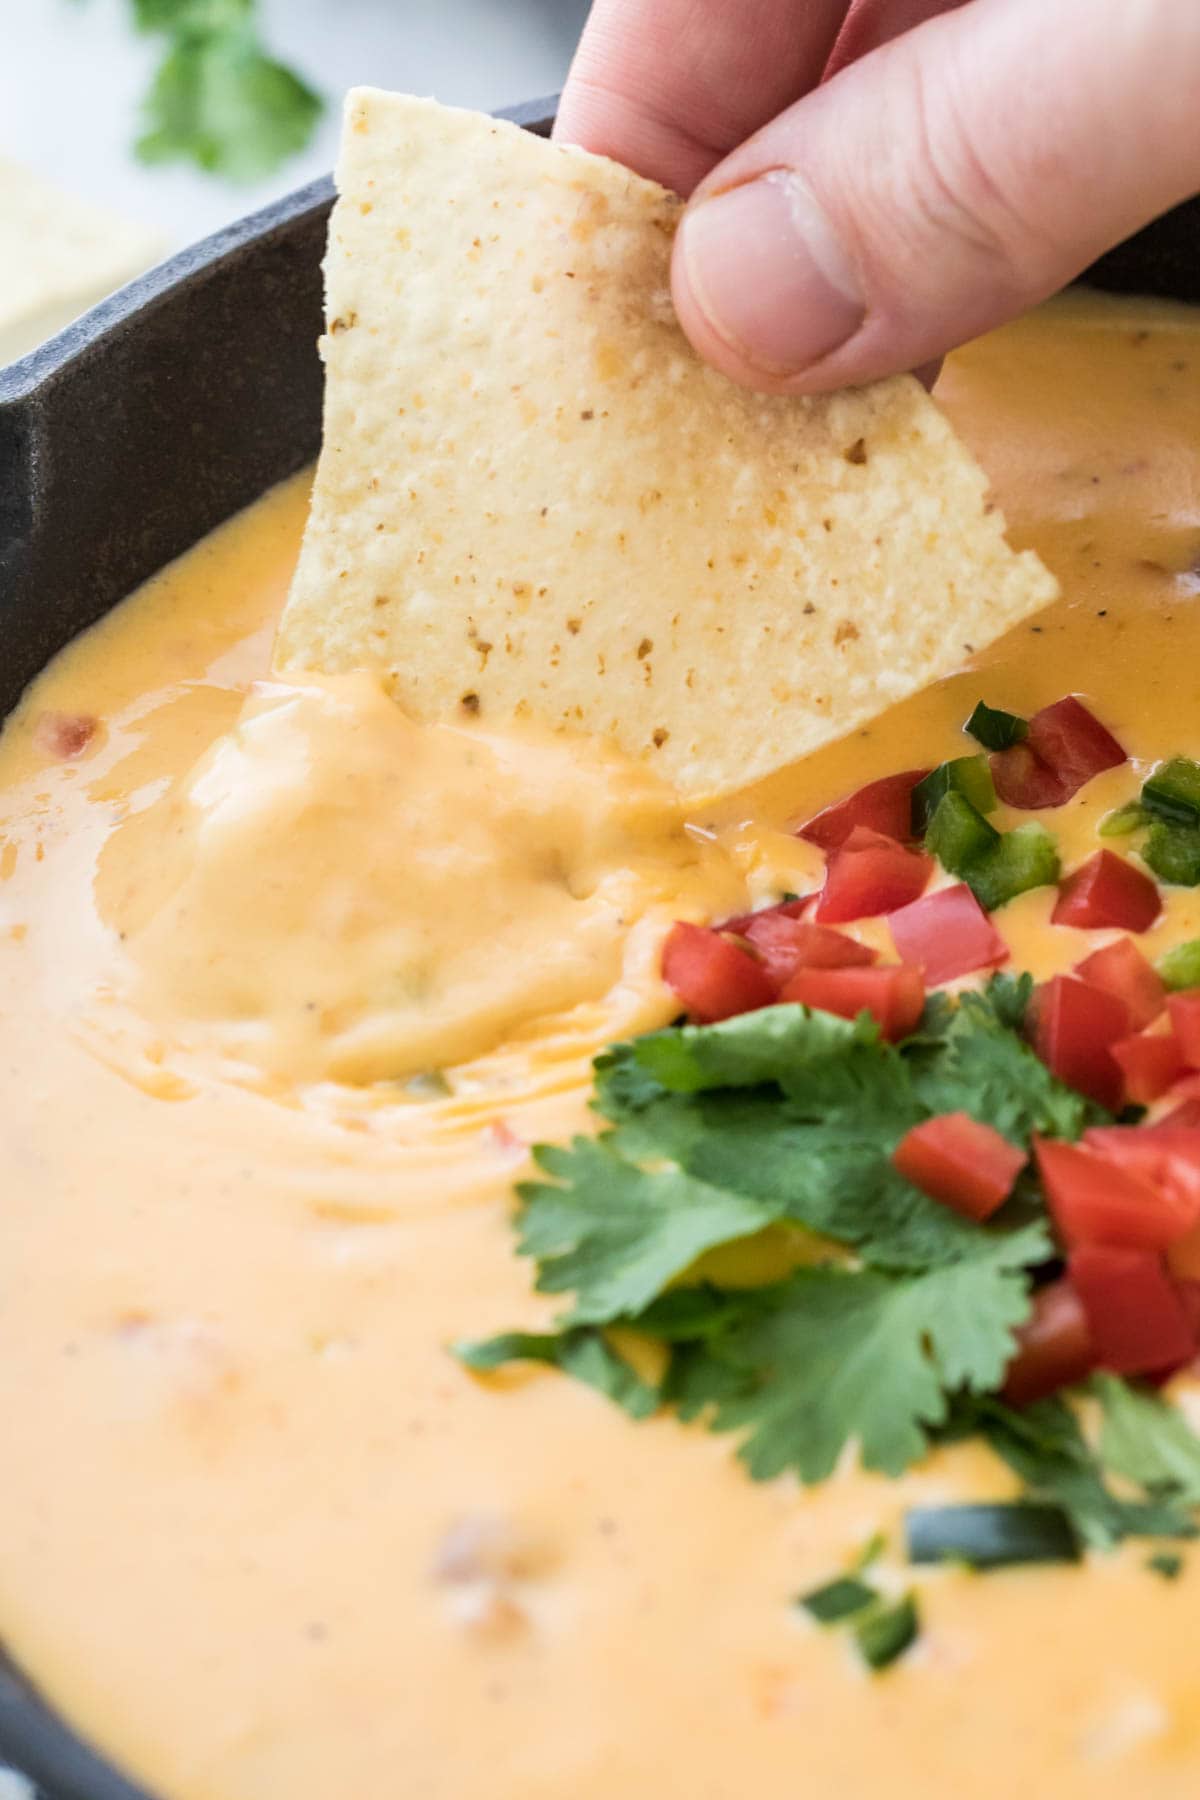 corn tortilla chip being dipped into homemade queso topped with cilantro and diced tomato